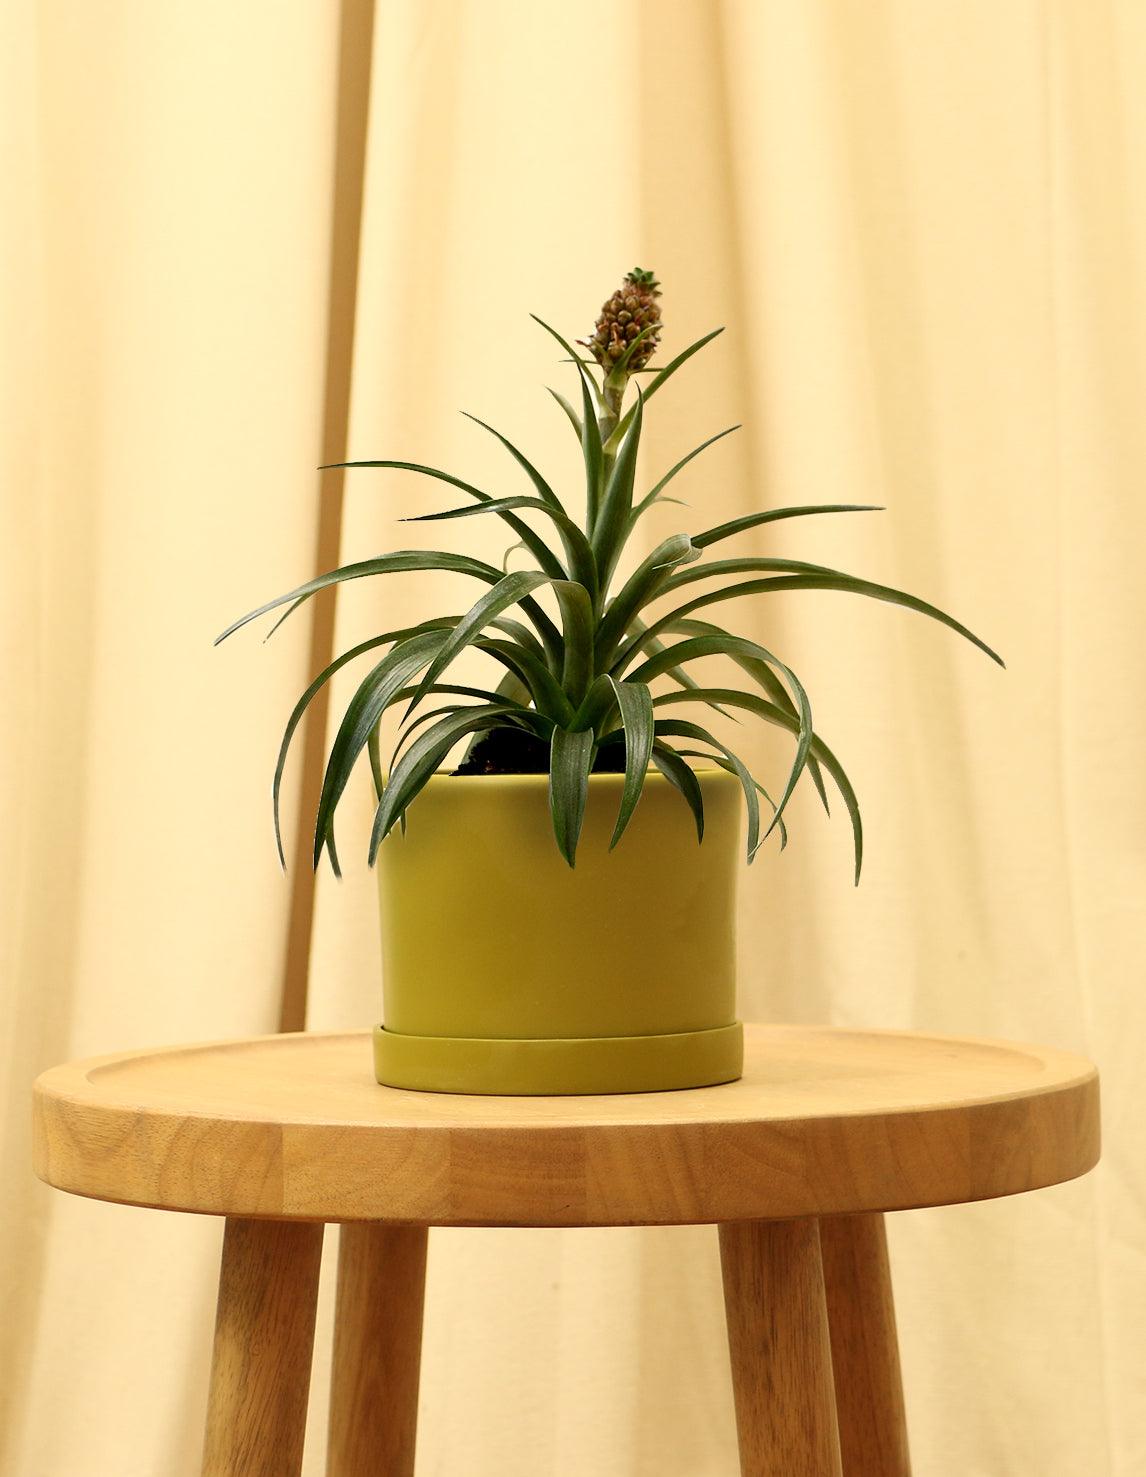 Small Bromeliad Pineapple Plant in green pot.